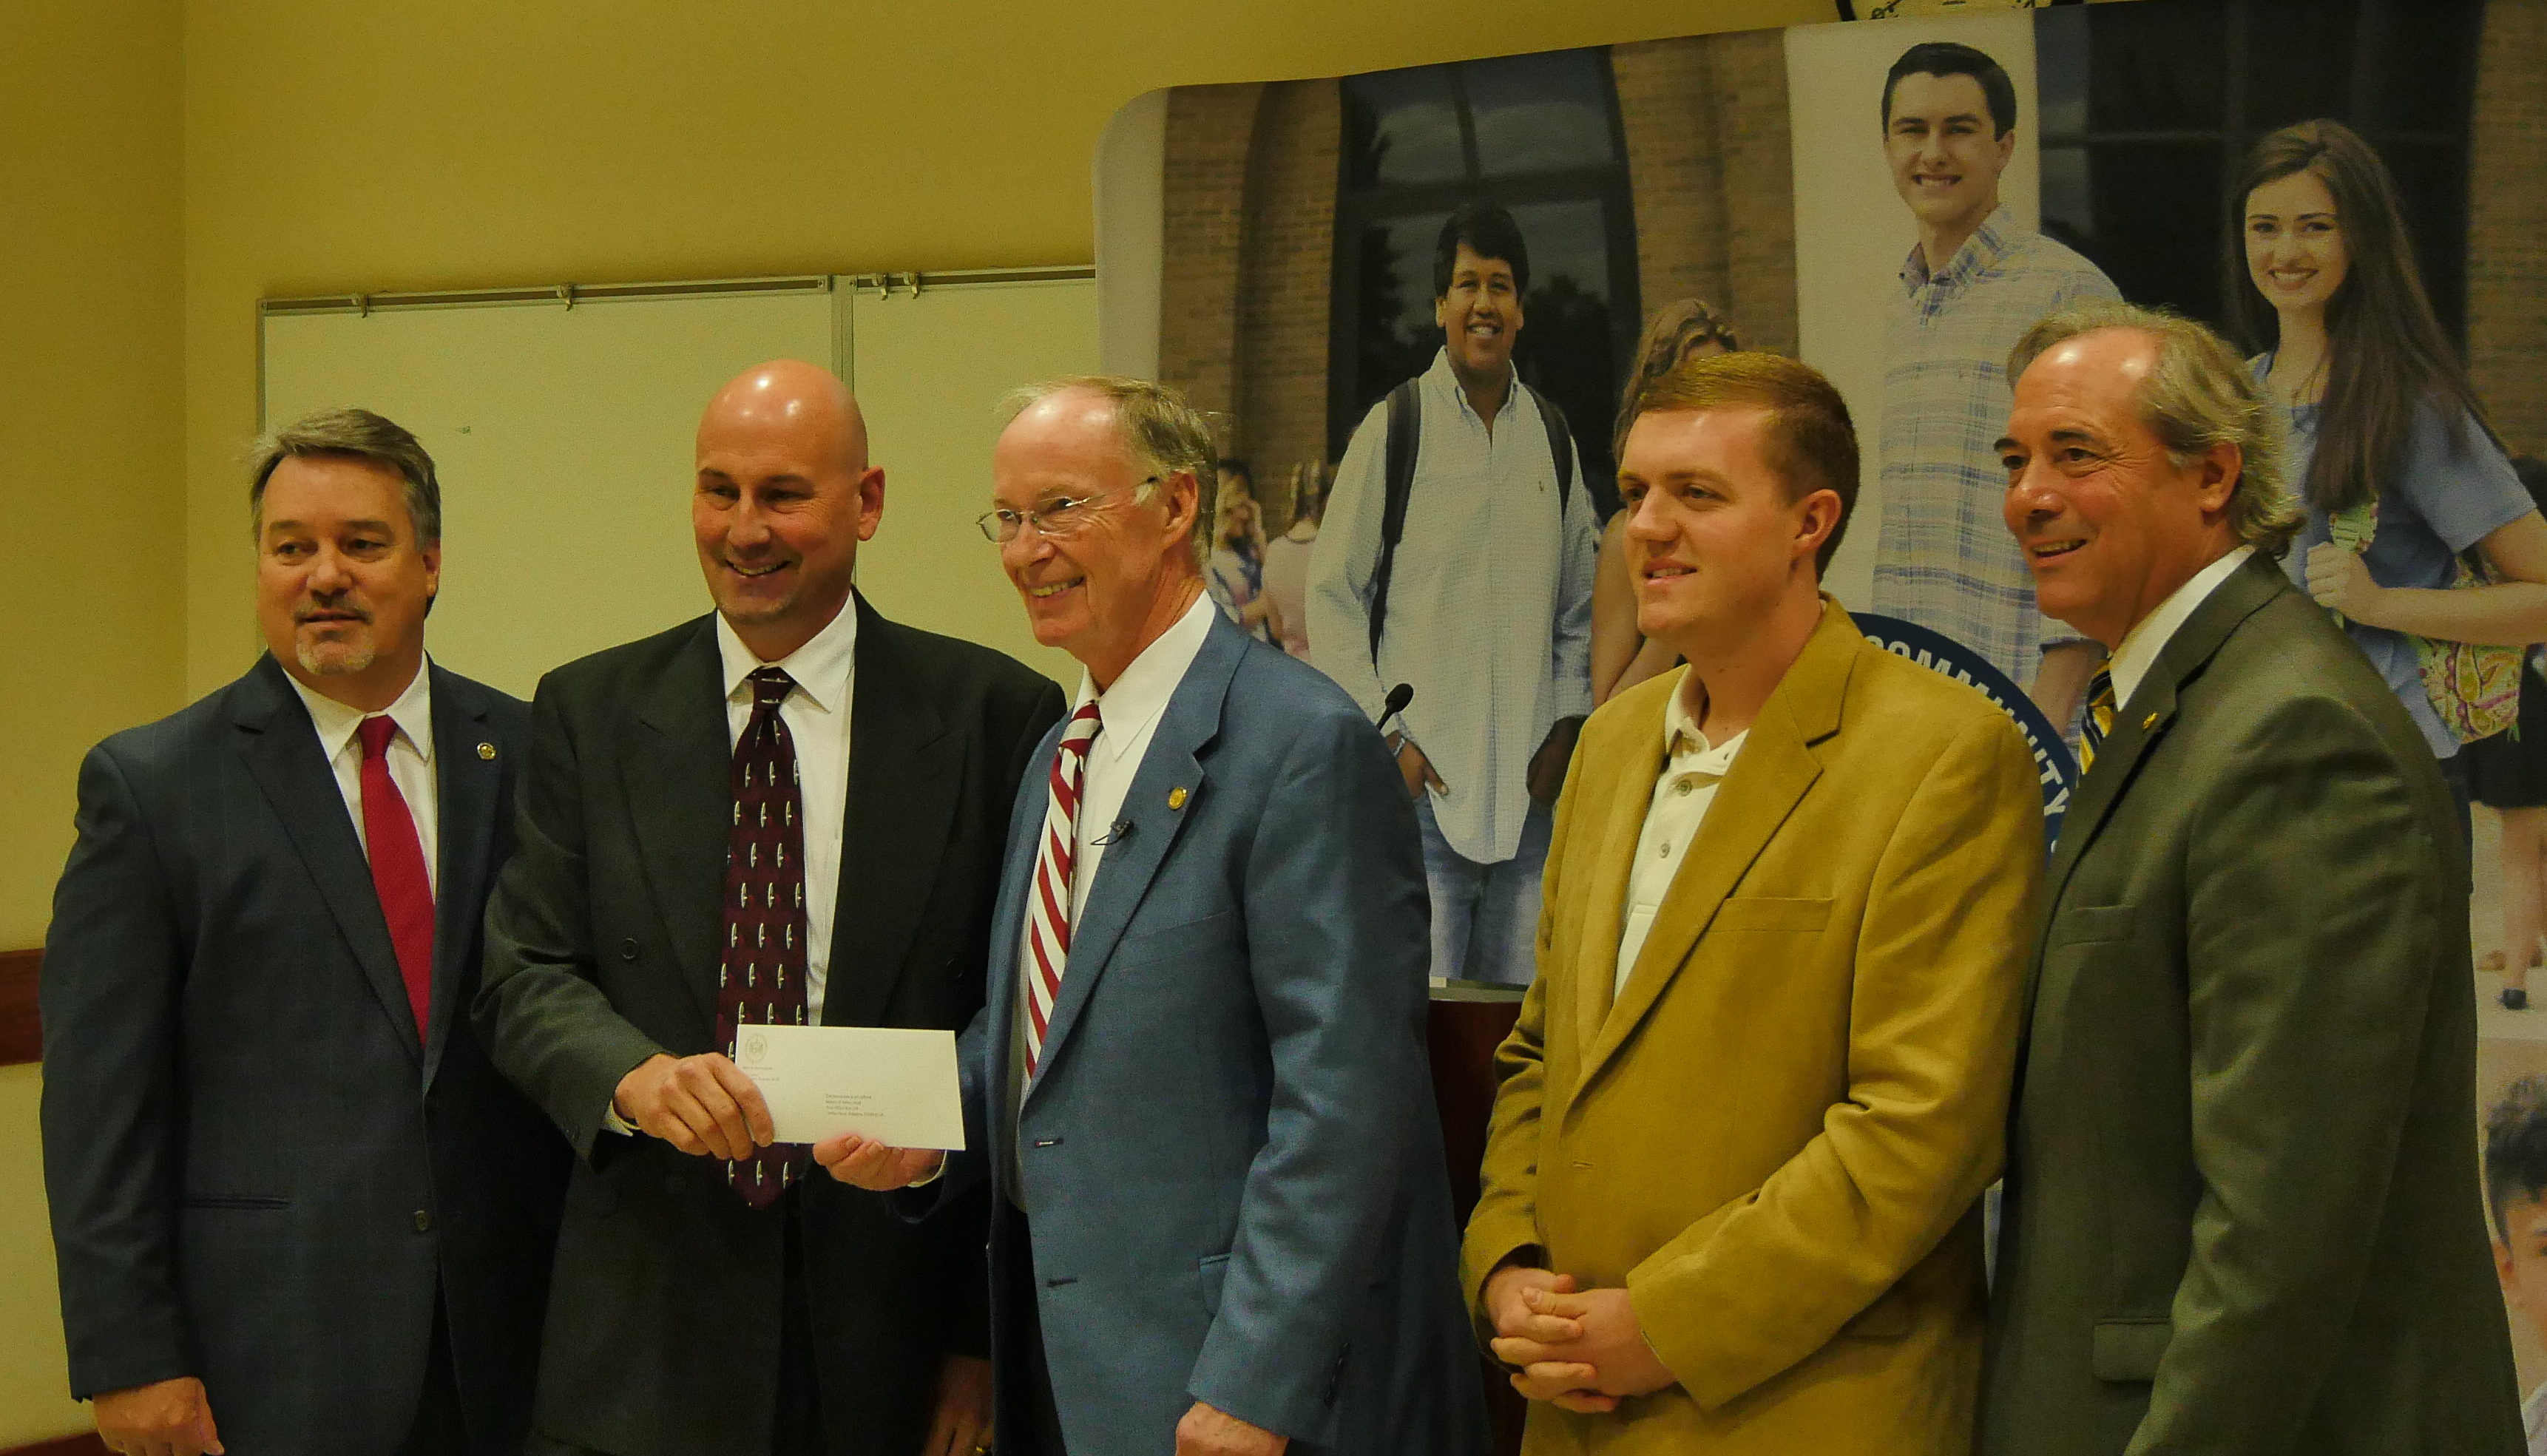 Governor Visits NACC, awards $2.2 million in grants to area towns